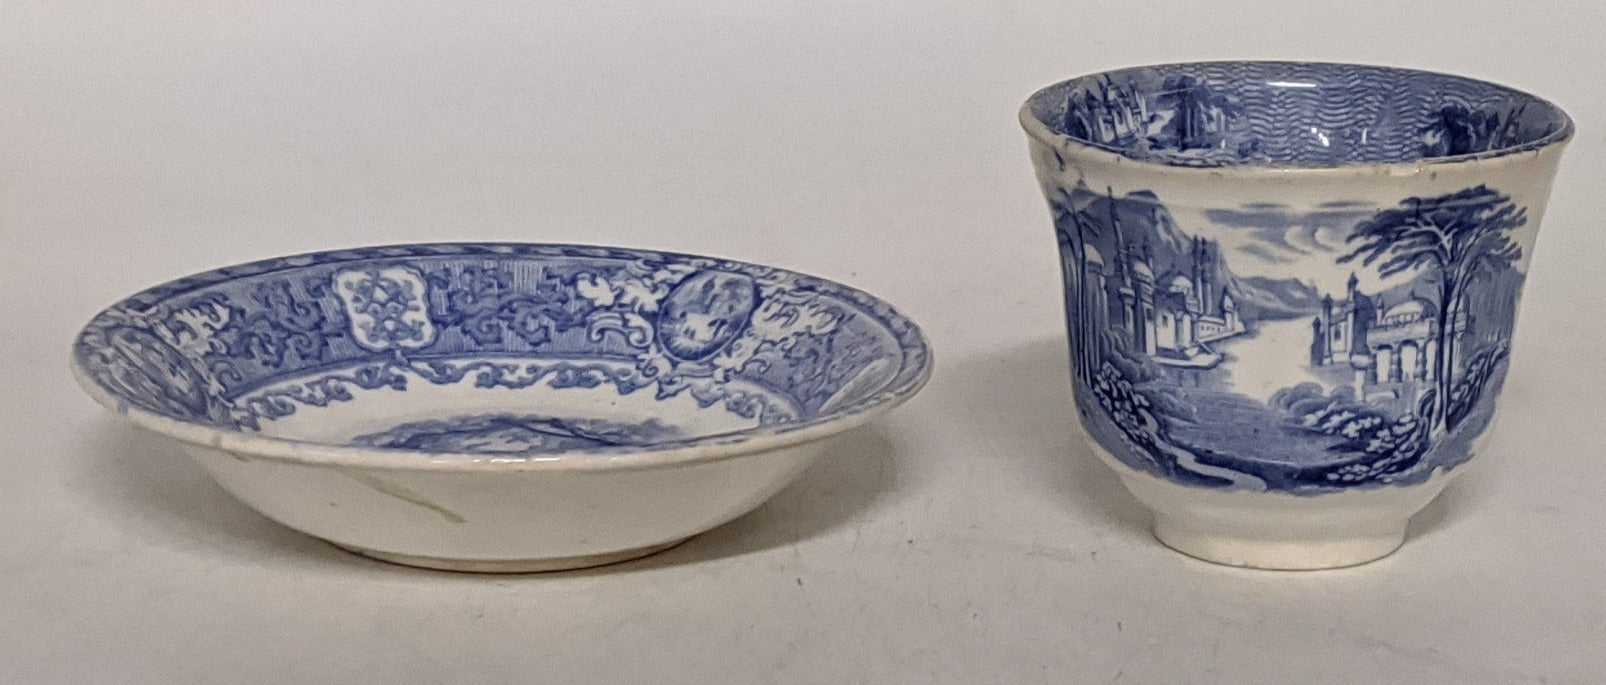 19TH CENTURY STAFFORDSHIRE BLUE AND WHITE COFFEE CUP